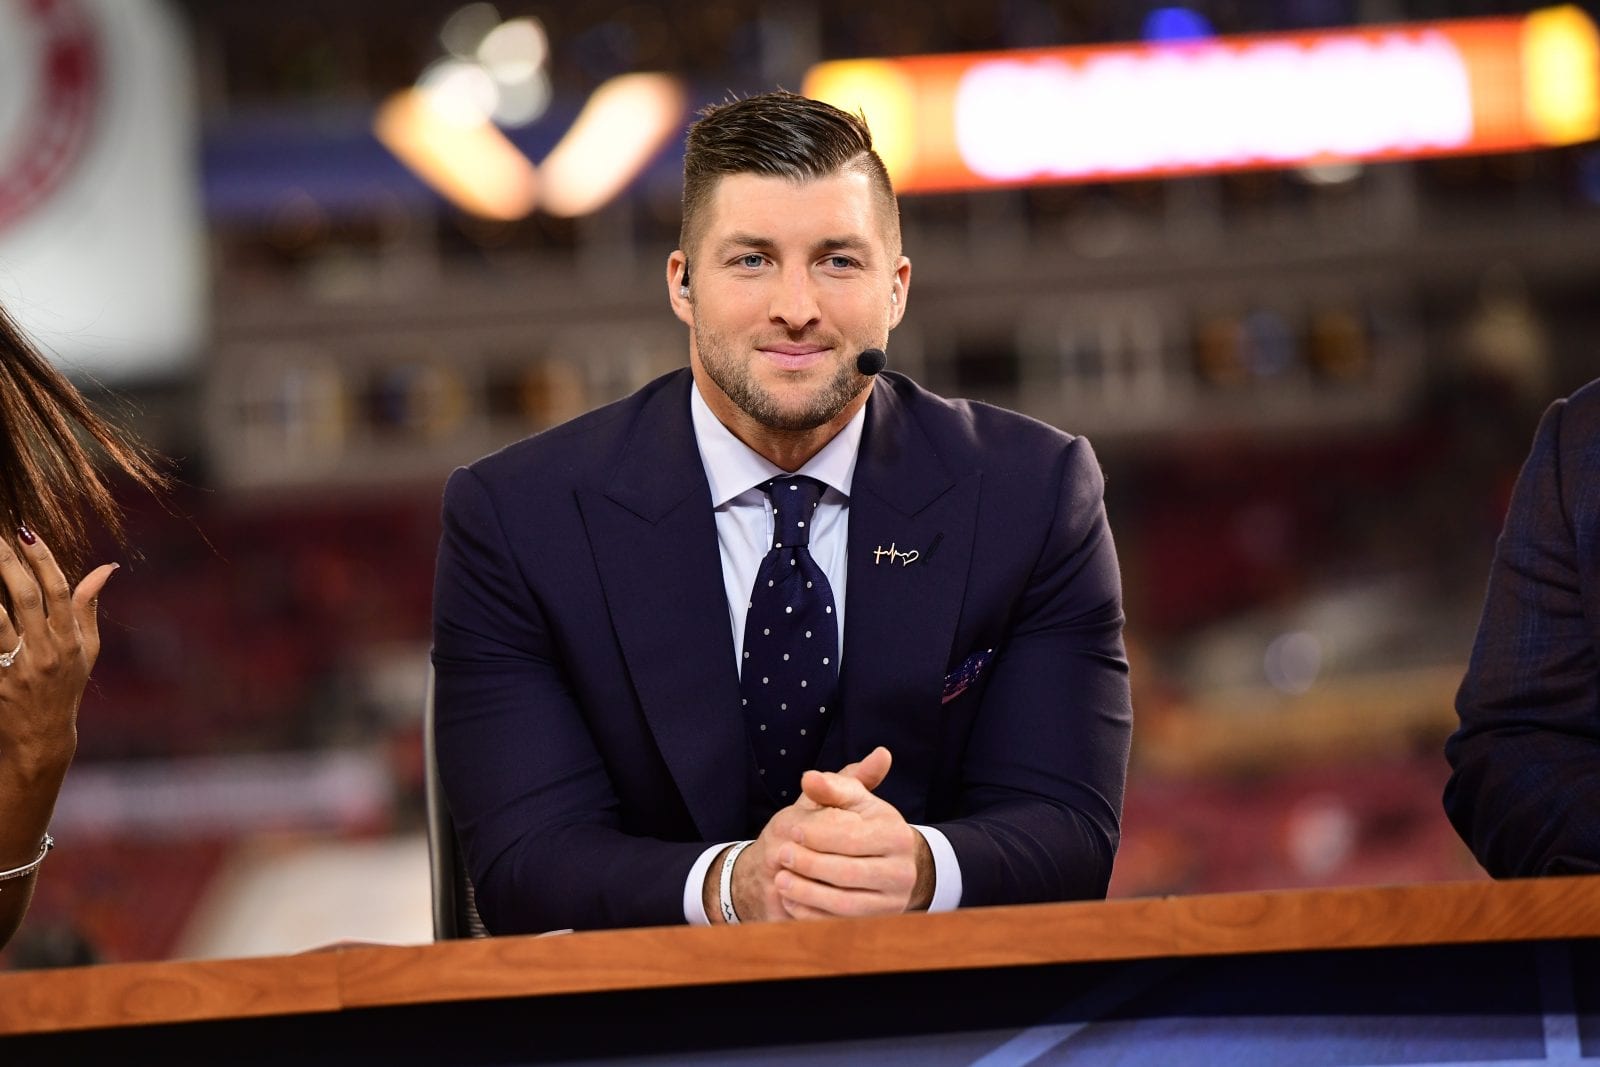 A Brief Story of the Career Life of Tim Tebow